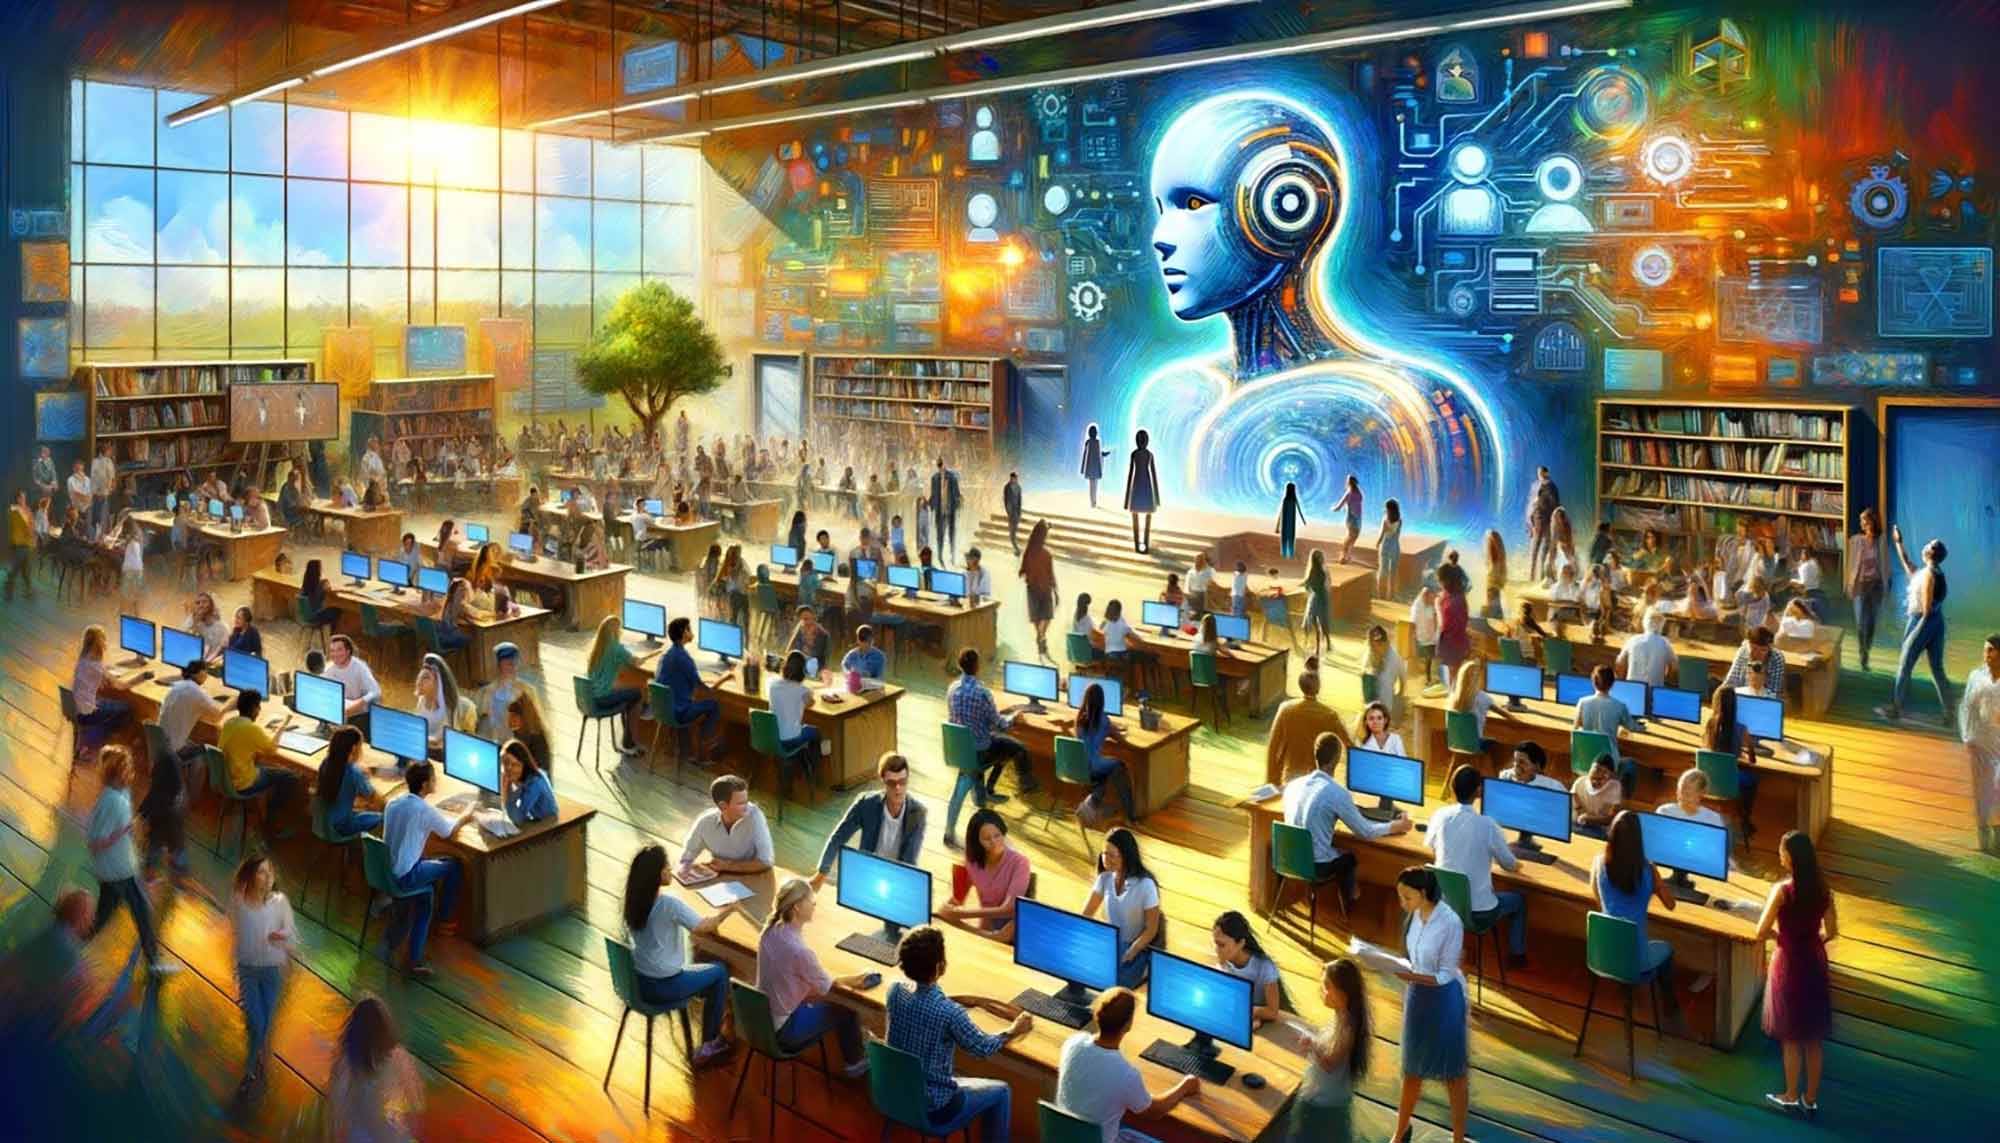 AI art of people sitting in a room full of computers with a cyborg illustration at the front of the room